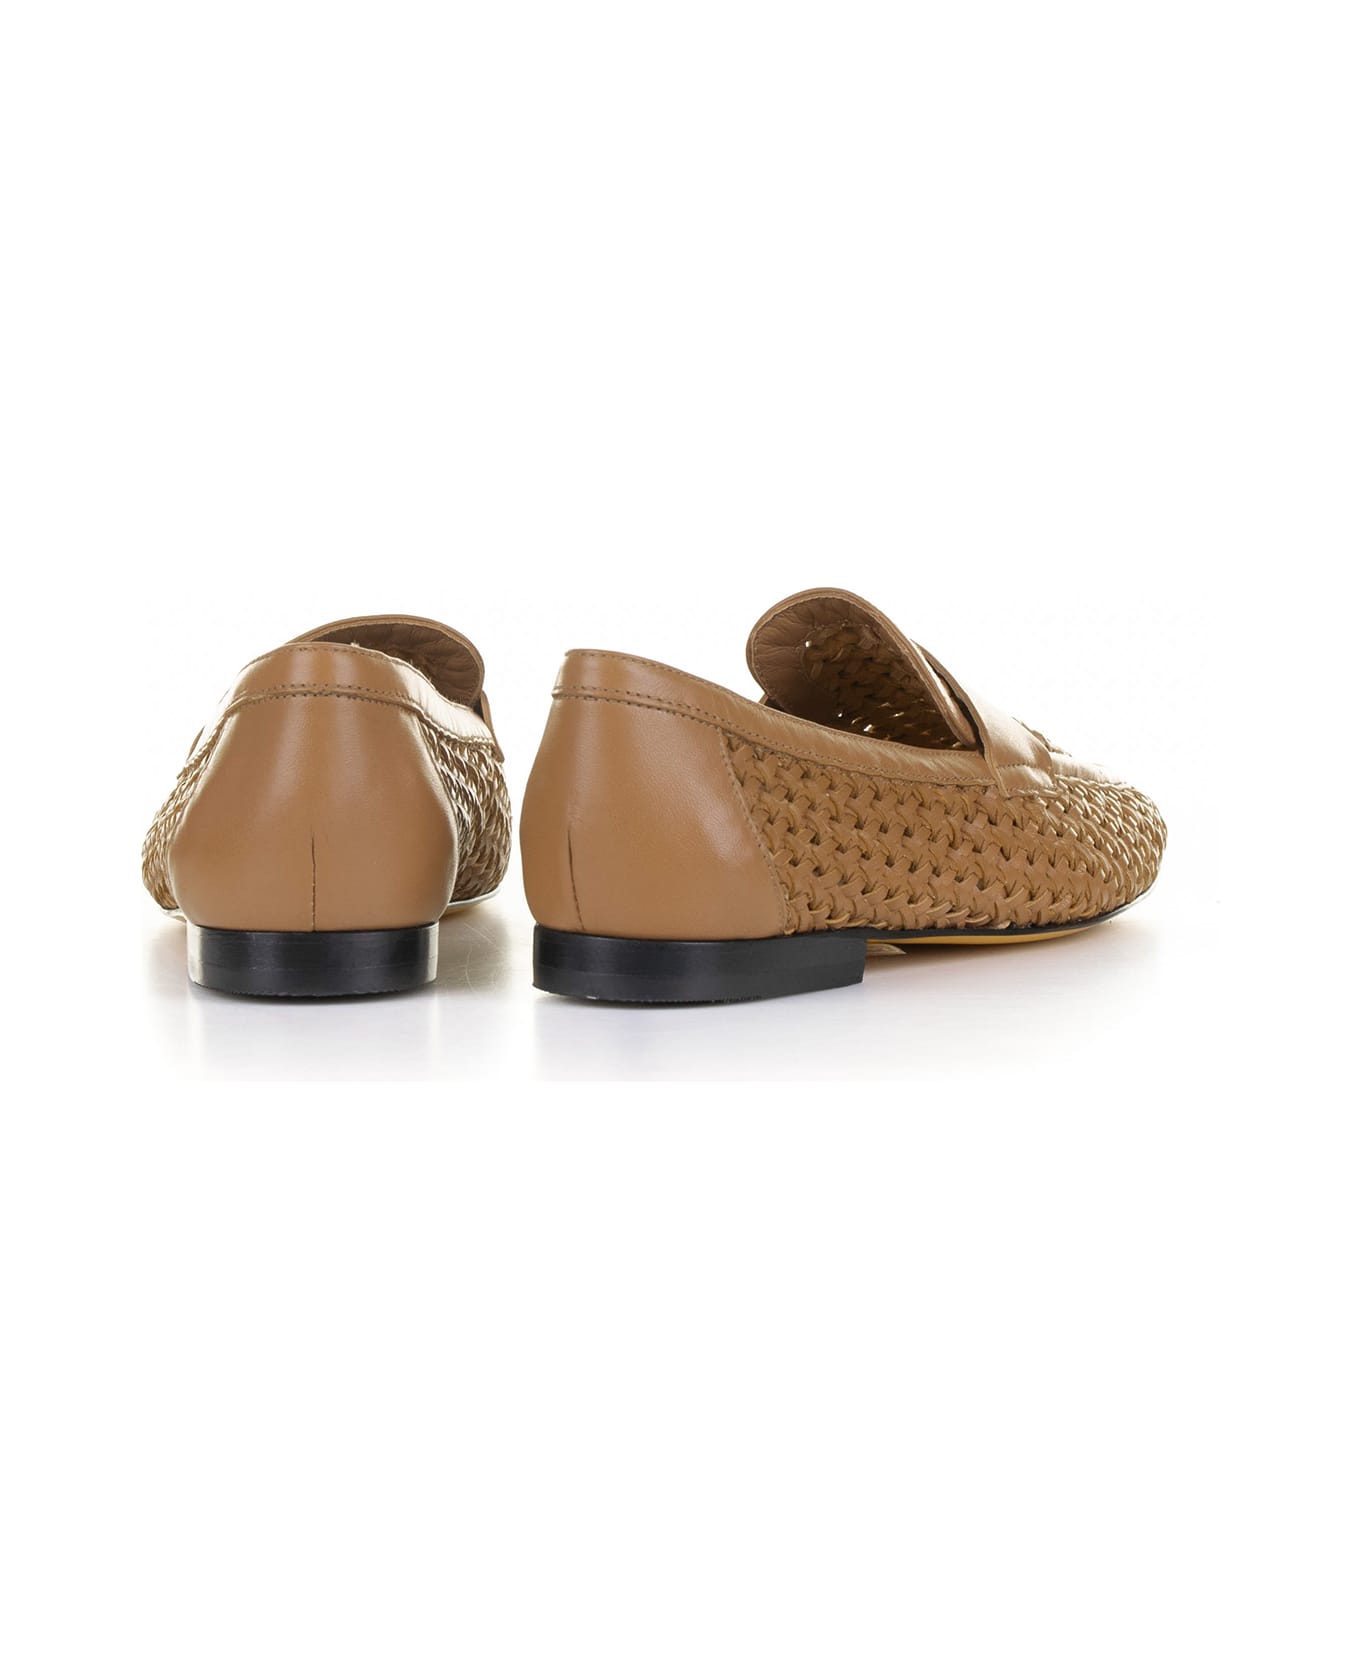 Doucal's Woven Leather Moccasin - NOCE